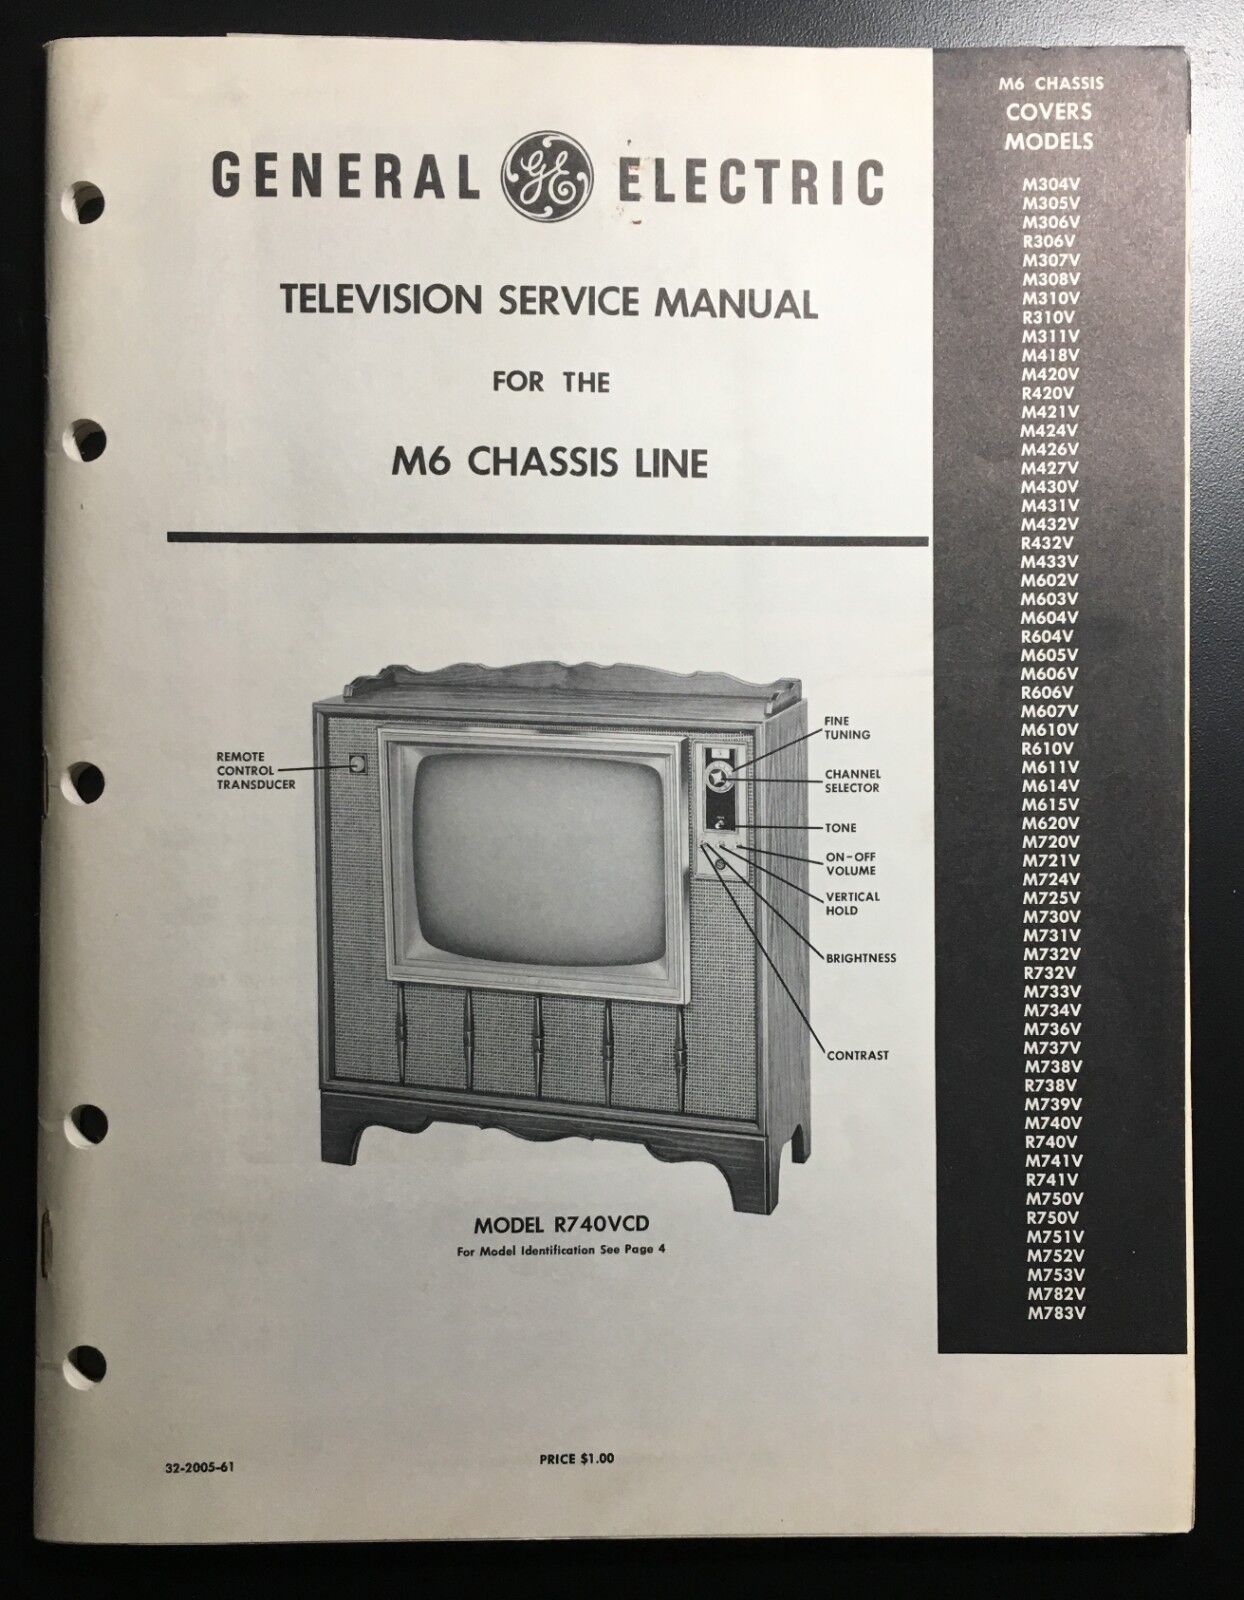 1961 General Electric 100 page Repair Manual for over 60 types of Televisions 